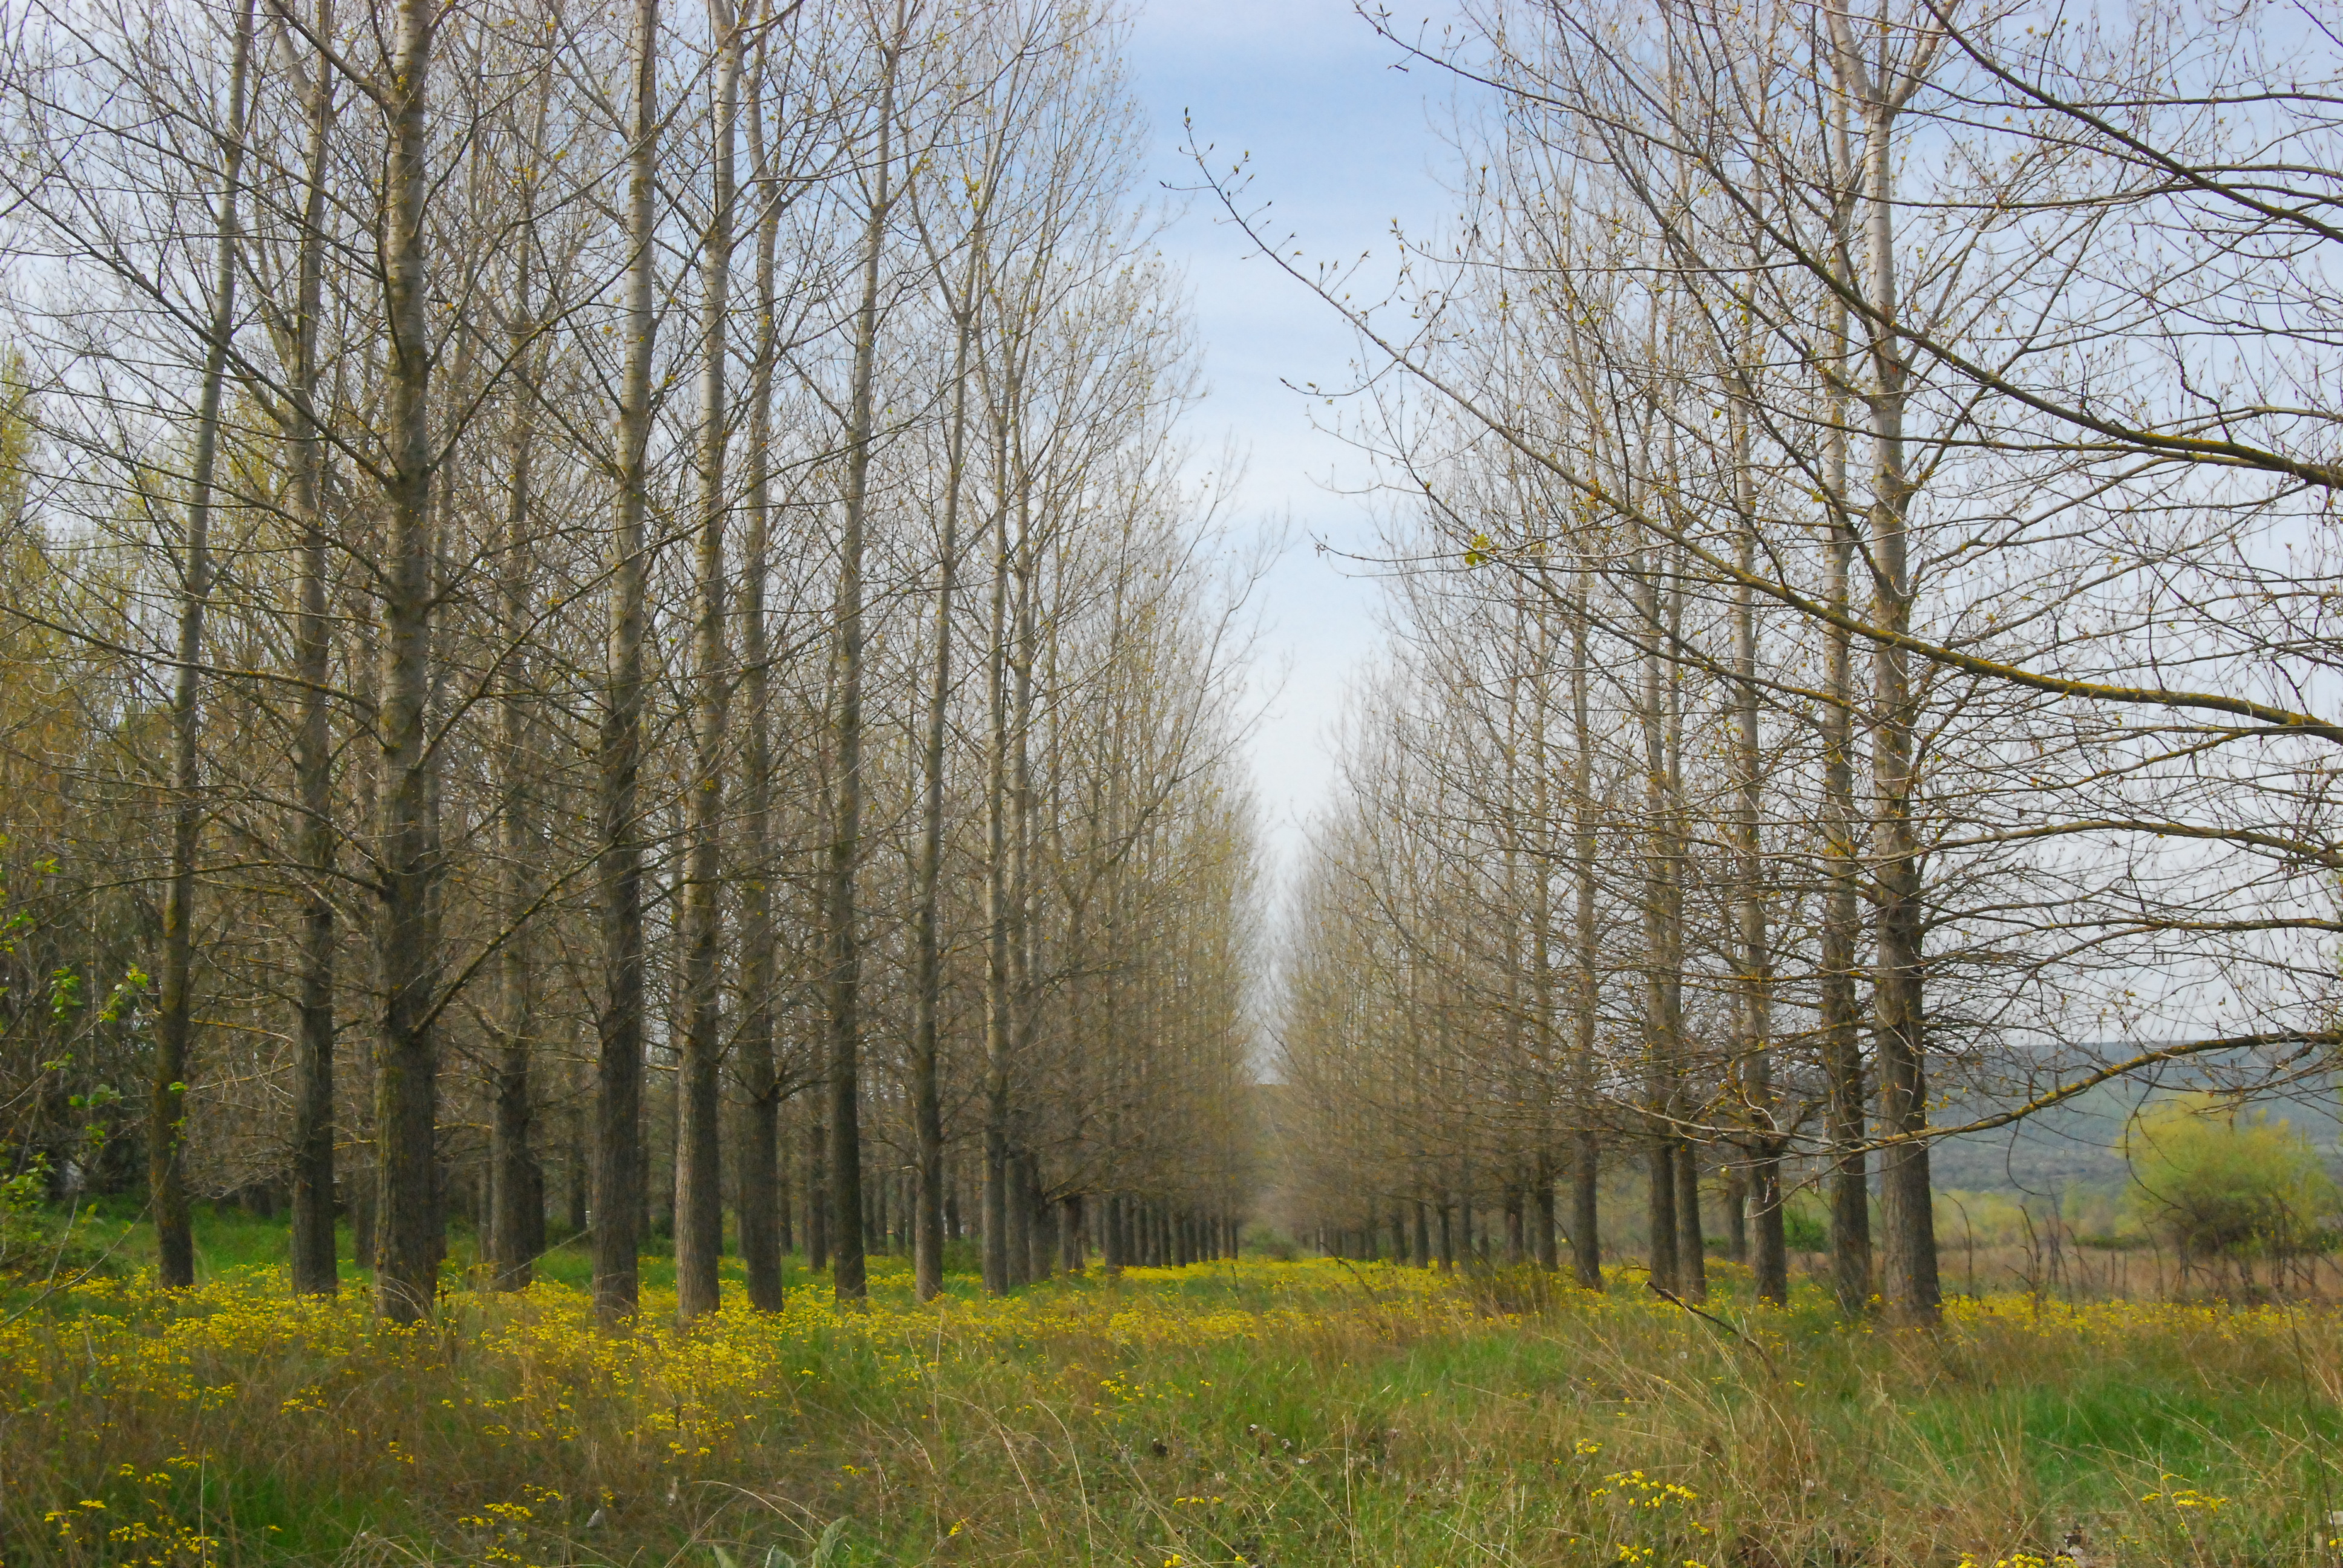 File:Early spring trees.jpg - Wikimedia Commons